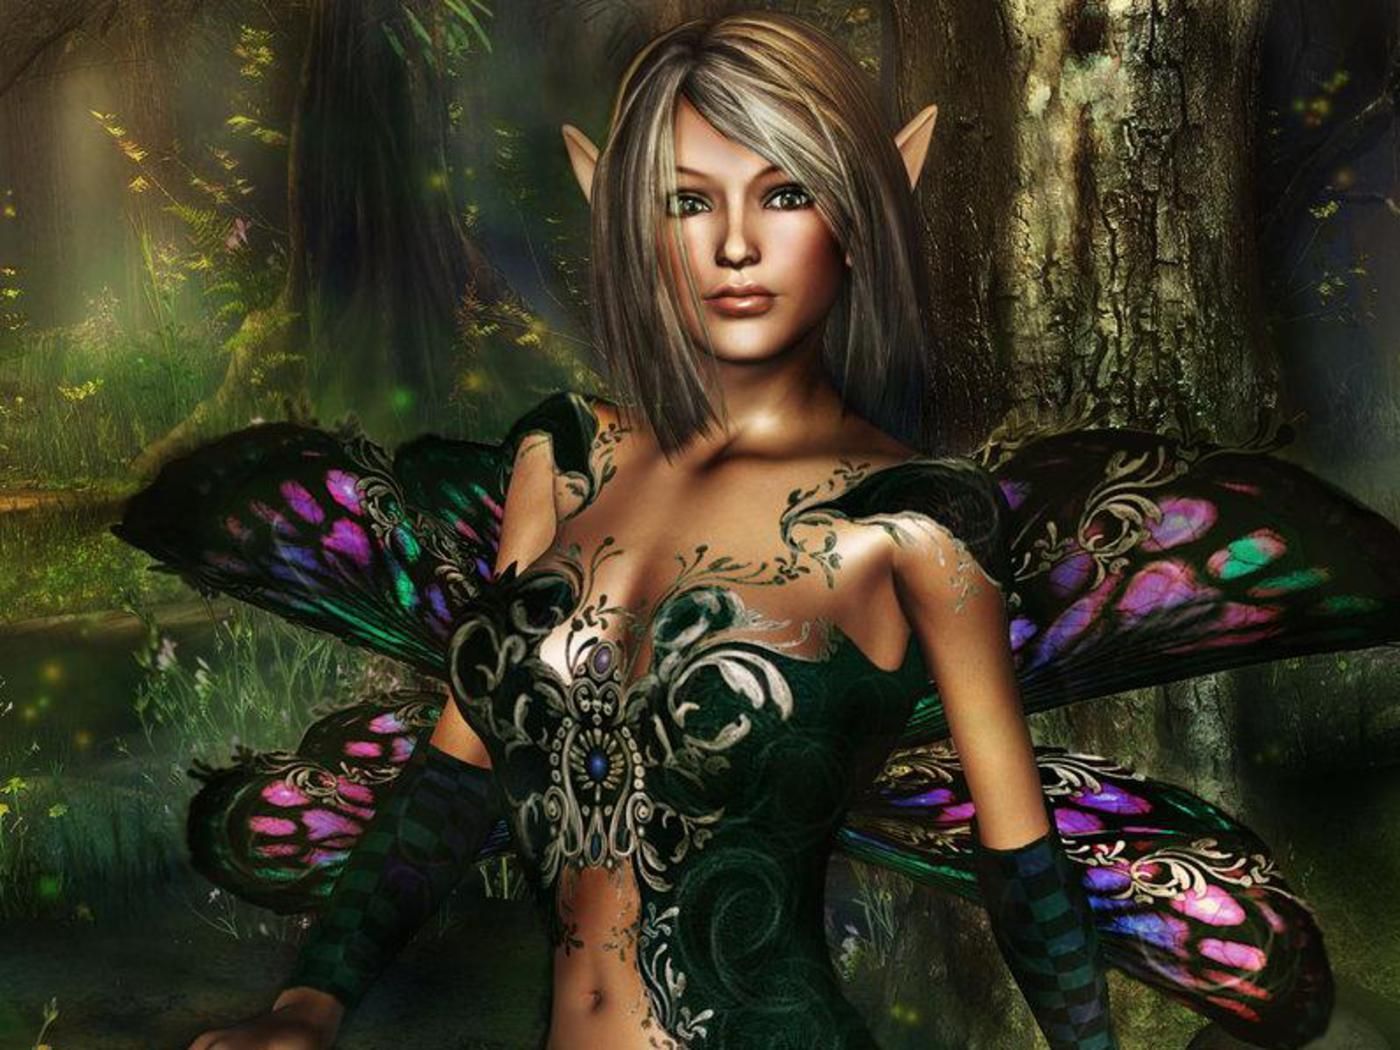 Pictures Of Fairies And Butterflies Wallpapers